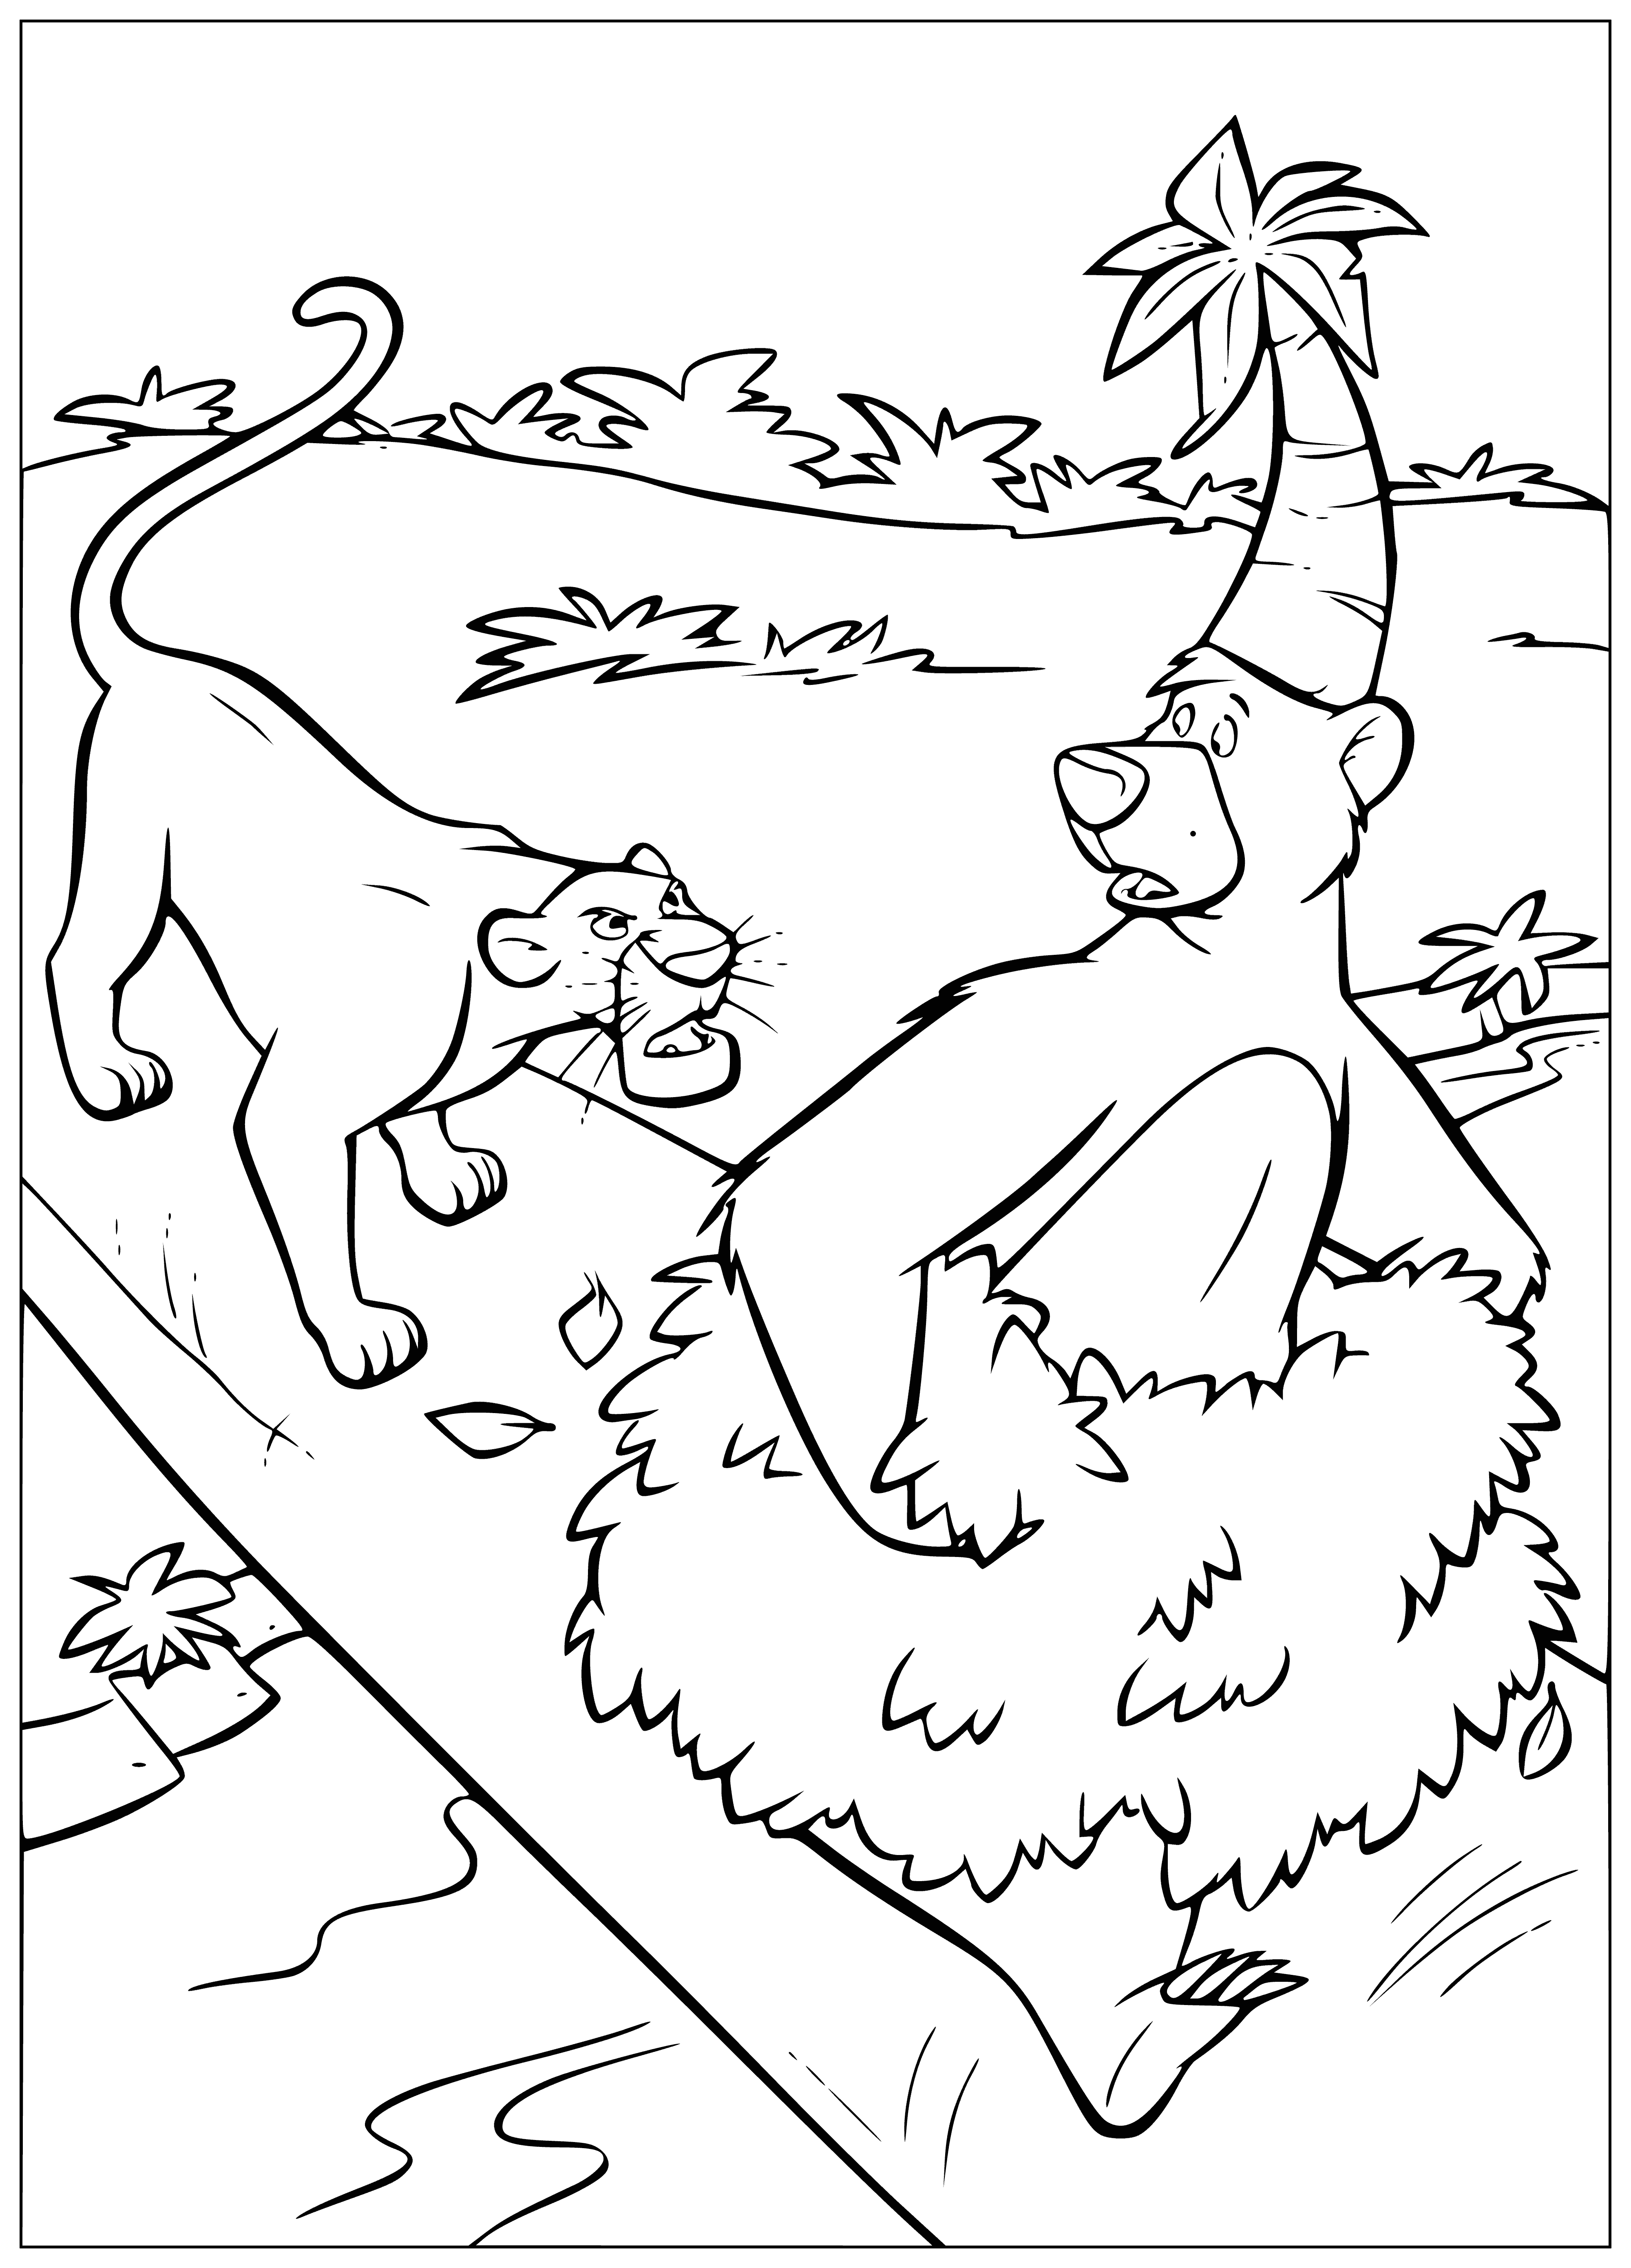 coloring page: Mowgli, a boy with brown skin and black hair in a loincloth, lays in a hammock with a fire and a monkey sitting next to him.